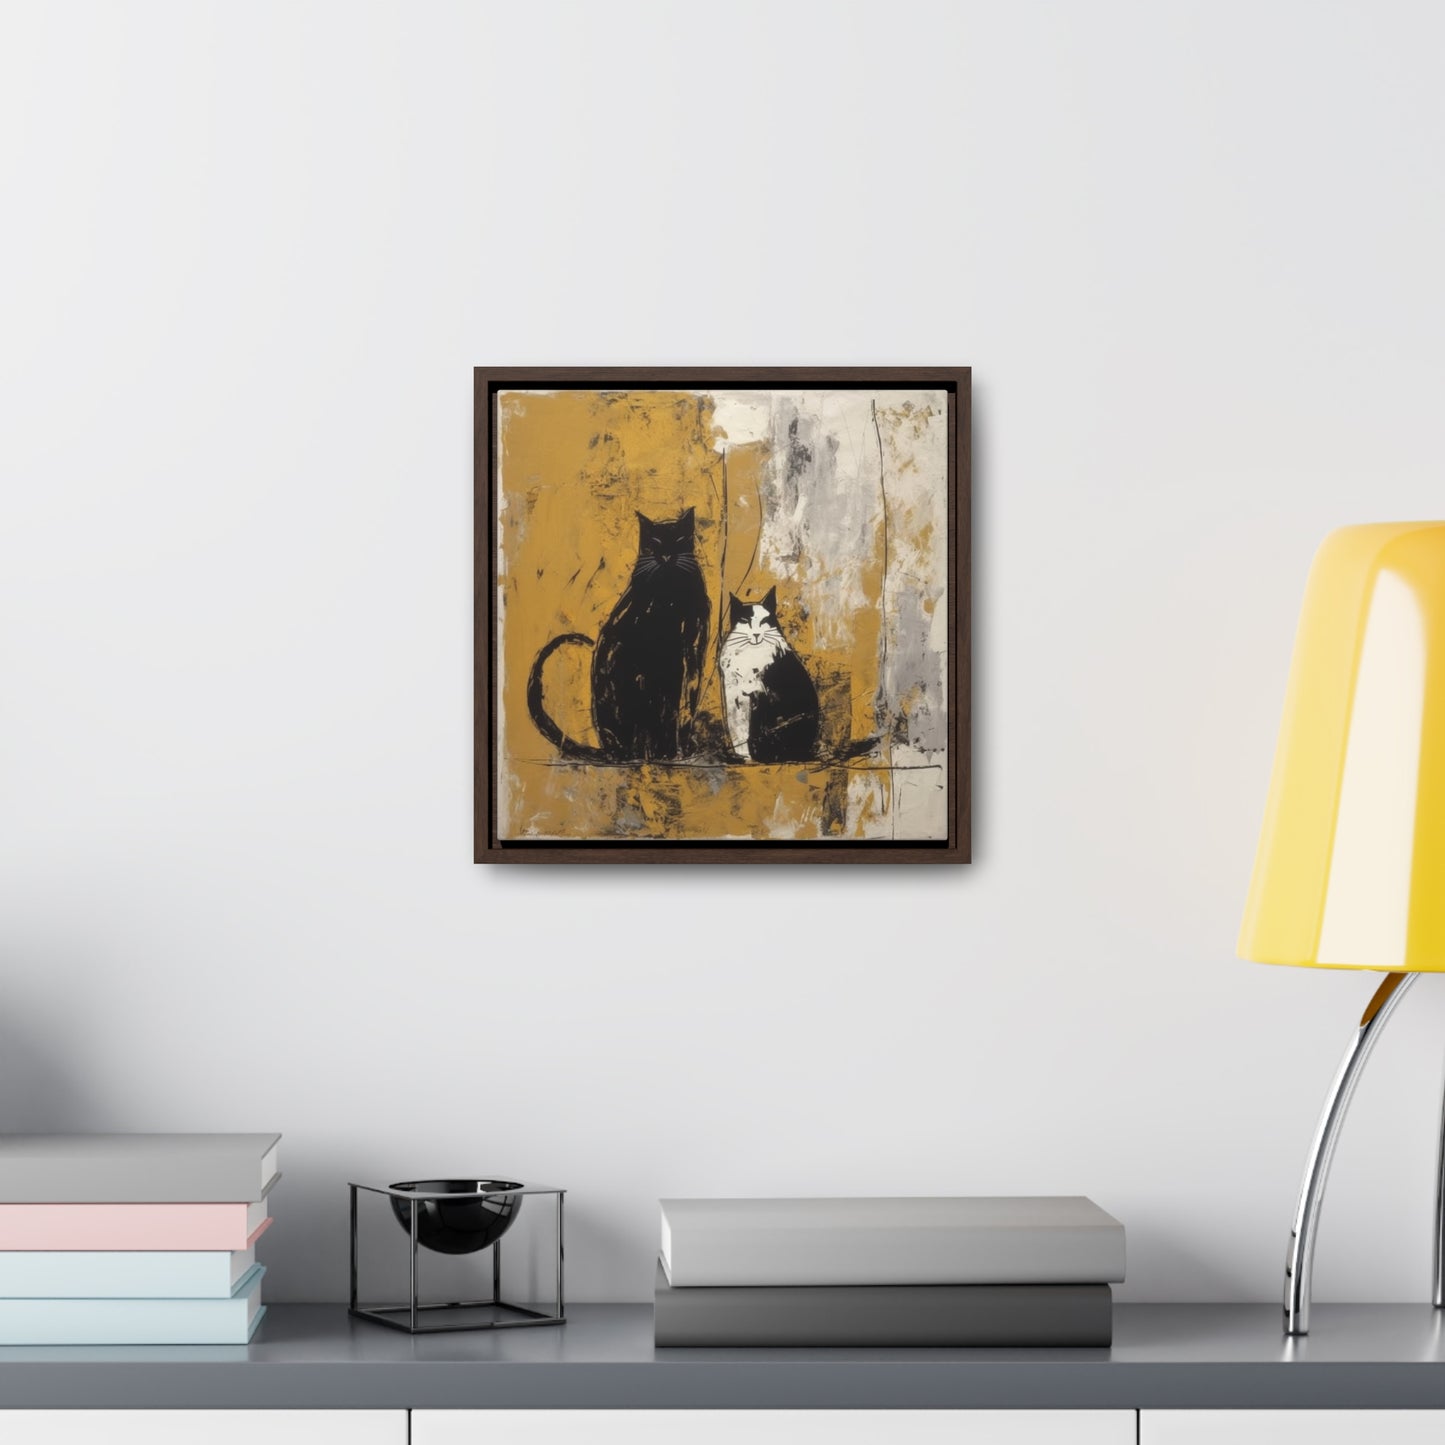 Cat 13, Gallery Canvas Wraps, Square Frame